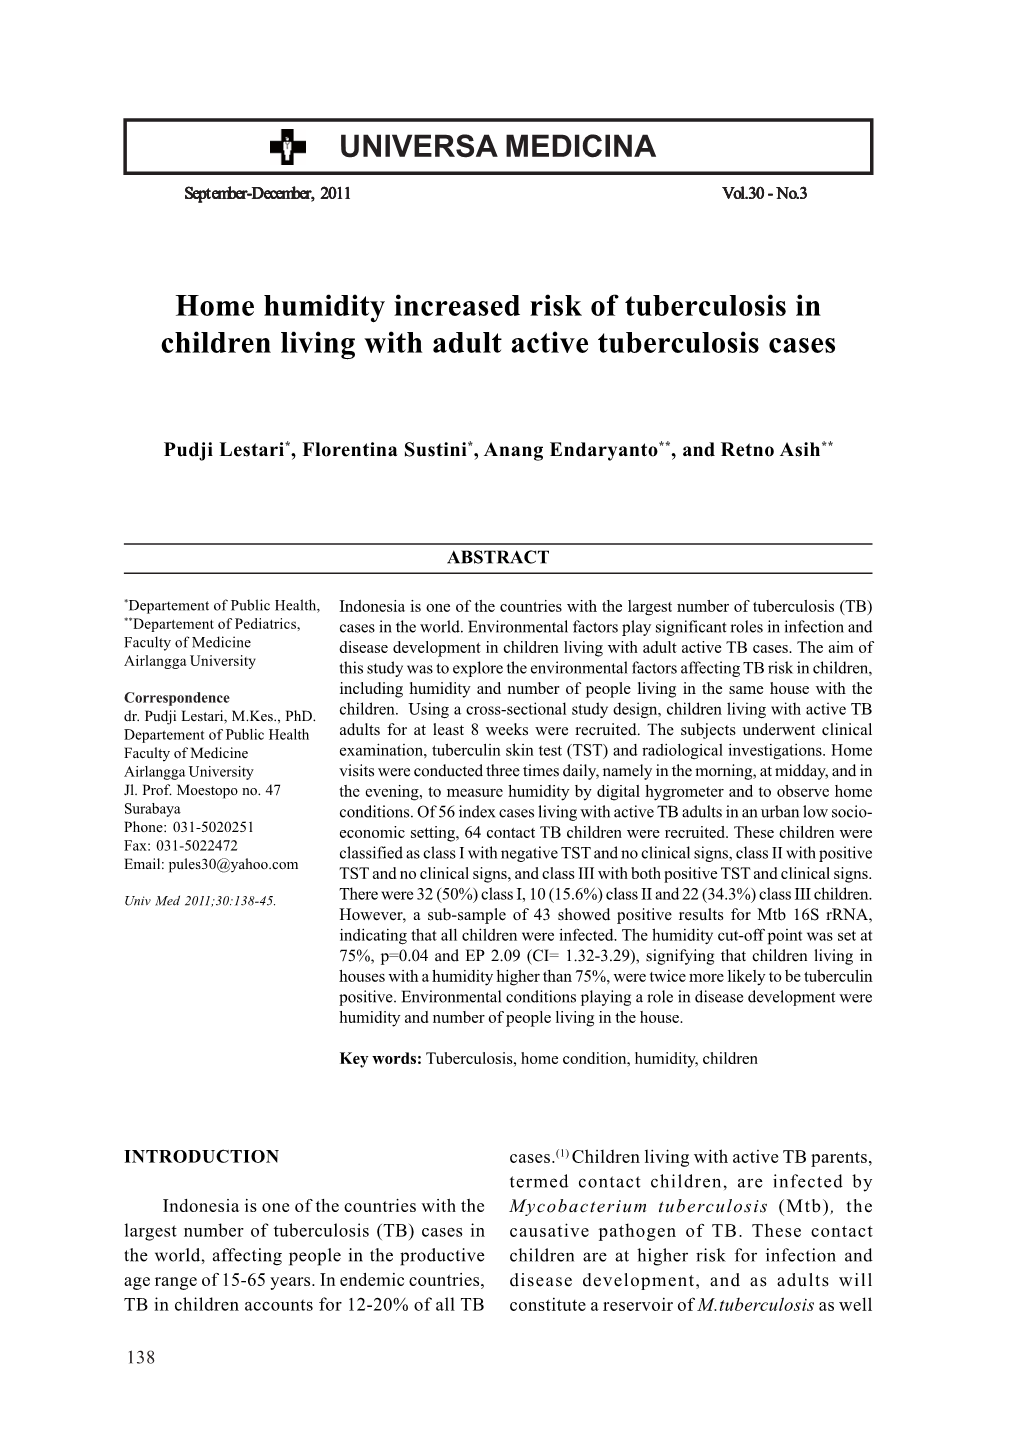 Home Humidity Increased Risk of Tuberculosis in Children Living with Adult Active Tuberculosis Cases